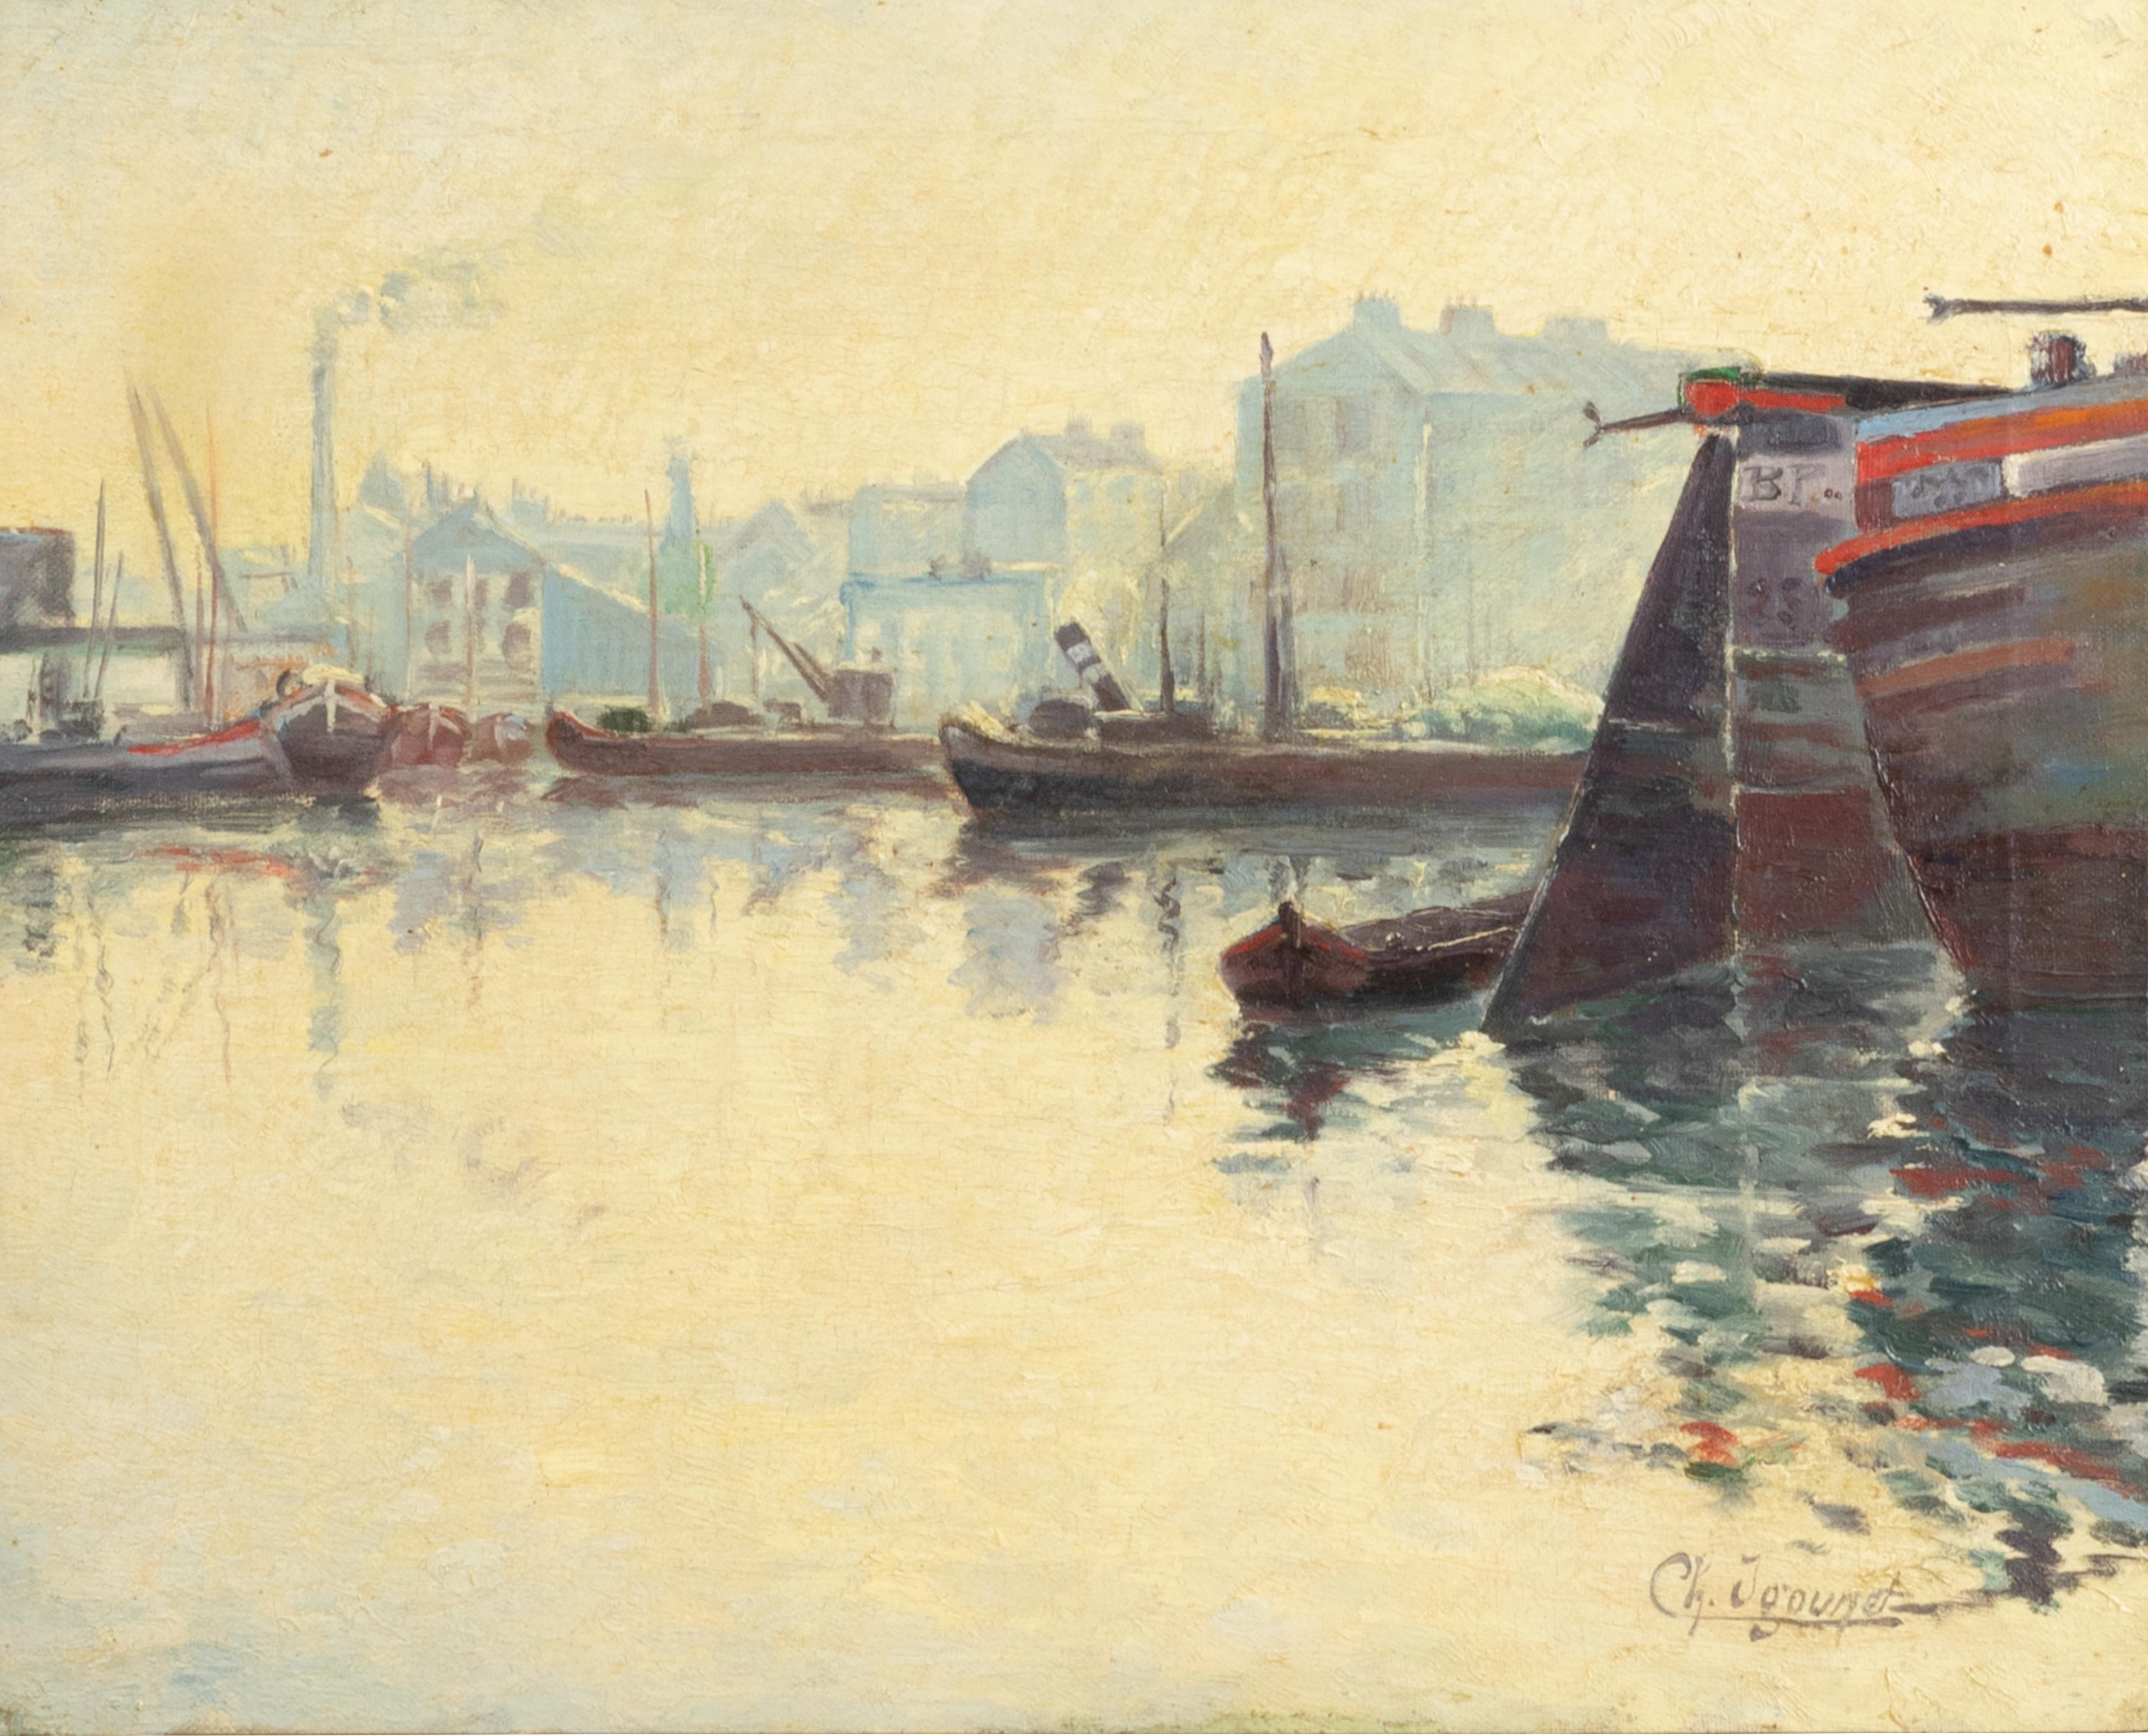 Canvas French Impressionism Pier Painting By «Charles Igounet de Villers» (1881-1944) For Sale